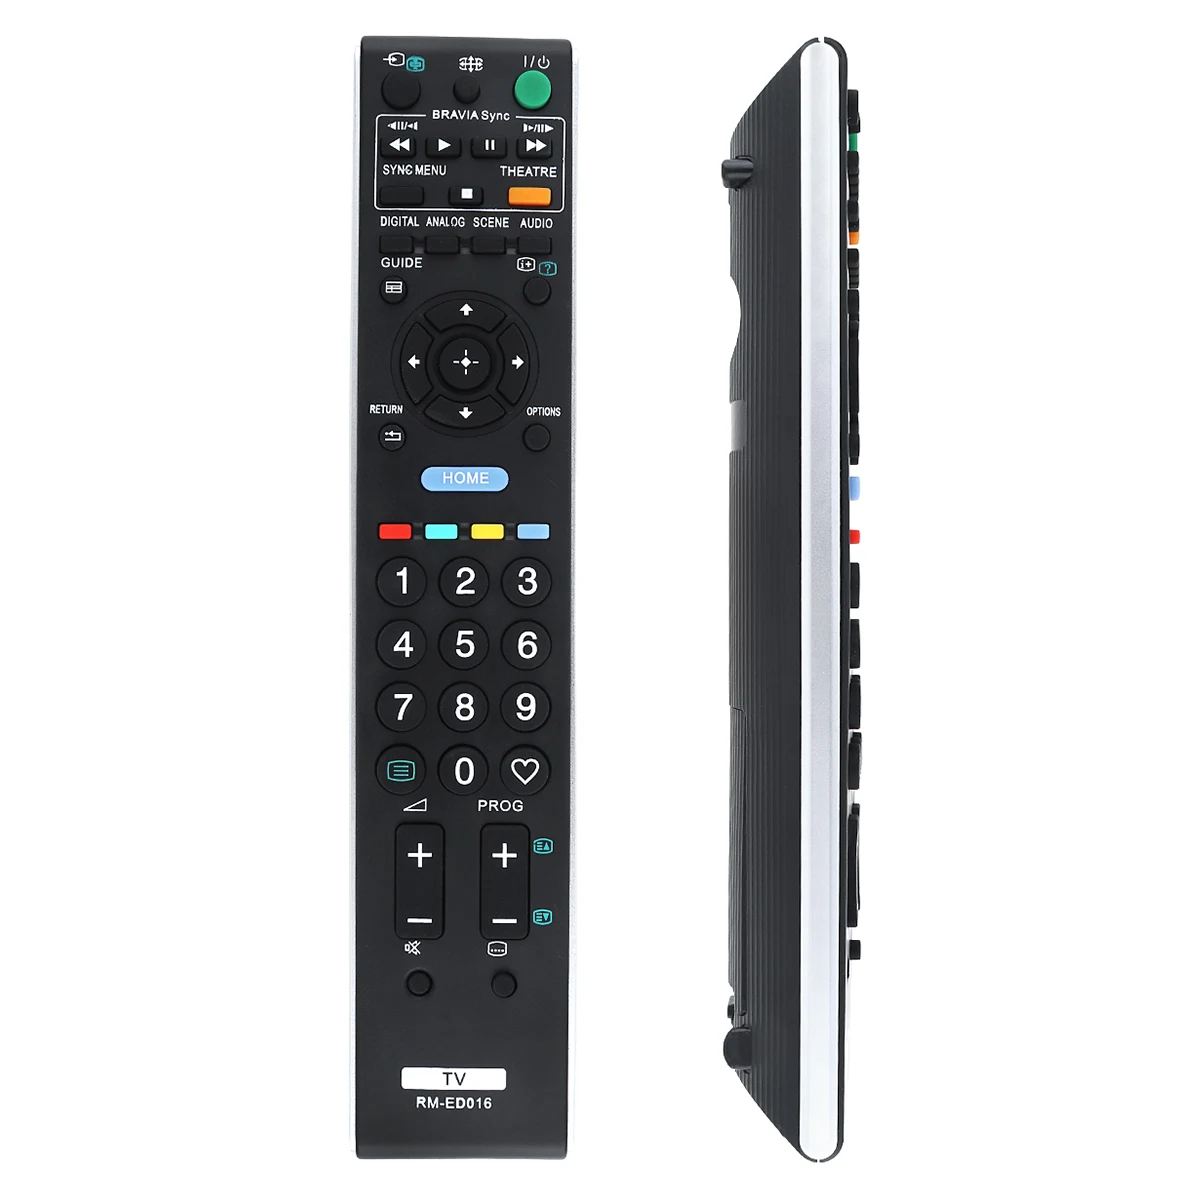 

Universal Replacement 433MHz IR TV Remote Control with 10M Long Transmission Distance Fit for RM-ED016 Smart TV